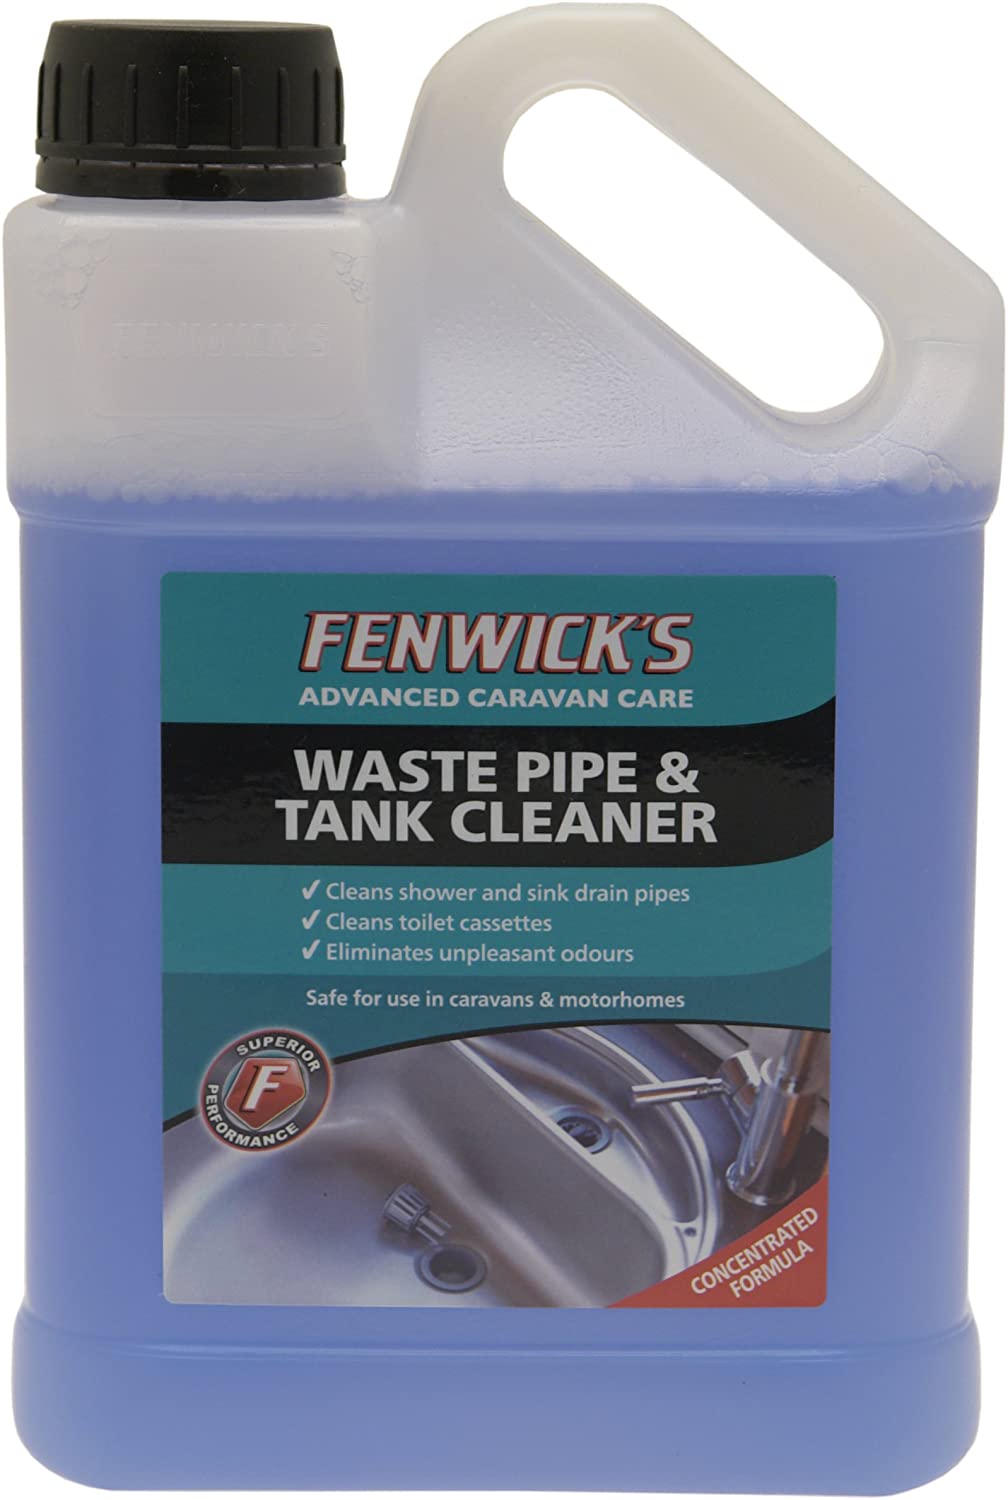 fenwicks waste pipe and tank cleaner isolated on white background